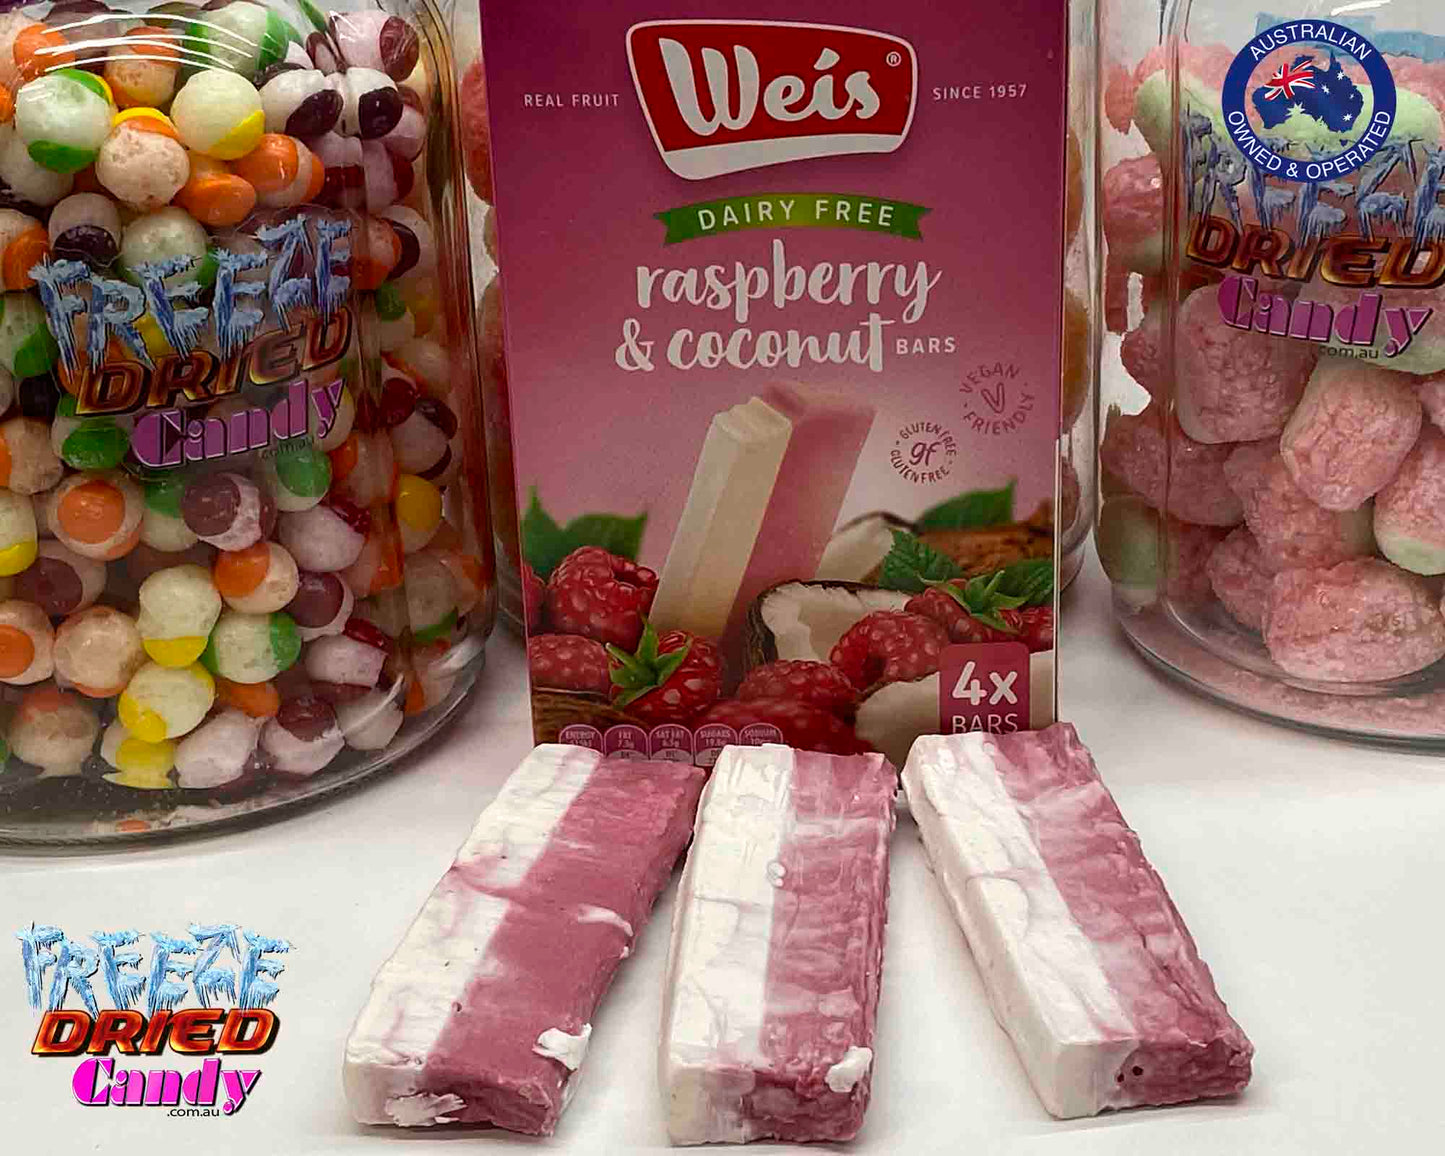 Freeze Dried Ice Cream WEIS® Bar -Raspberry & Coconut Weis Raspberry & Coconut bar is so unique, authentic, and perfectly balanced by a layer of traditional Weis ice cream. One bite and you're sure to be delighted. Fruit and cream are soulmates. Put them together with delicious natural ingredients, and you’ve got heaven in a Weis Bar. The two-toned Classic Weis Bars, a moreish combination of real fruit and their traditional cream strip, are an irresistible indulgence.